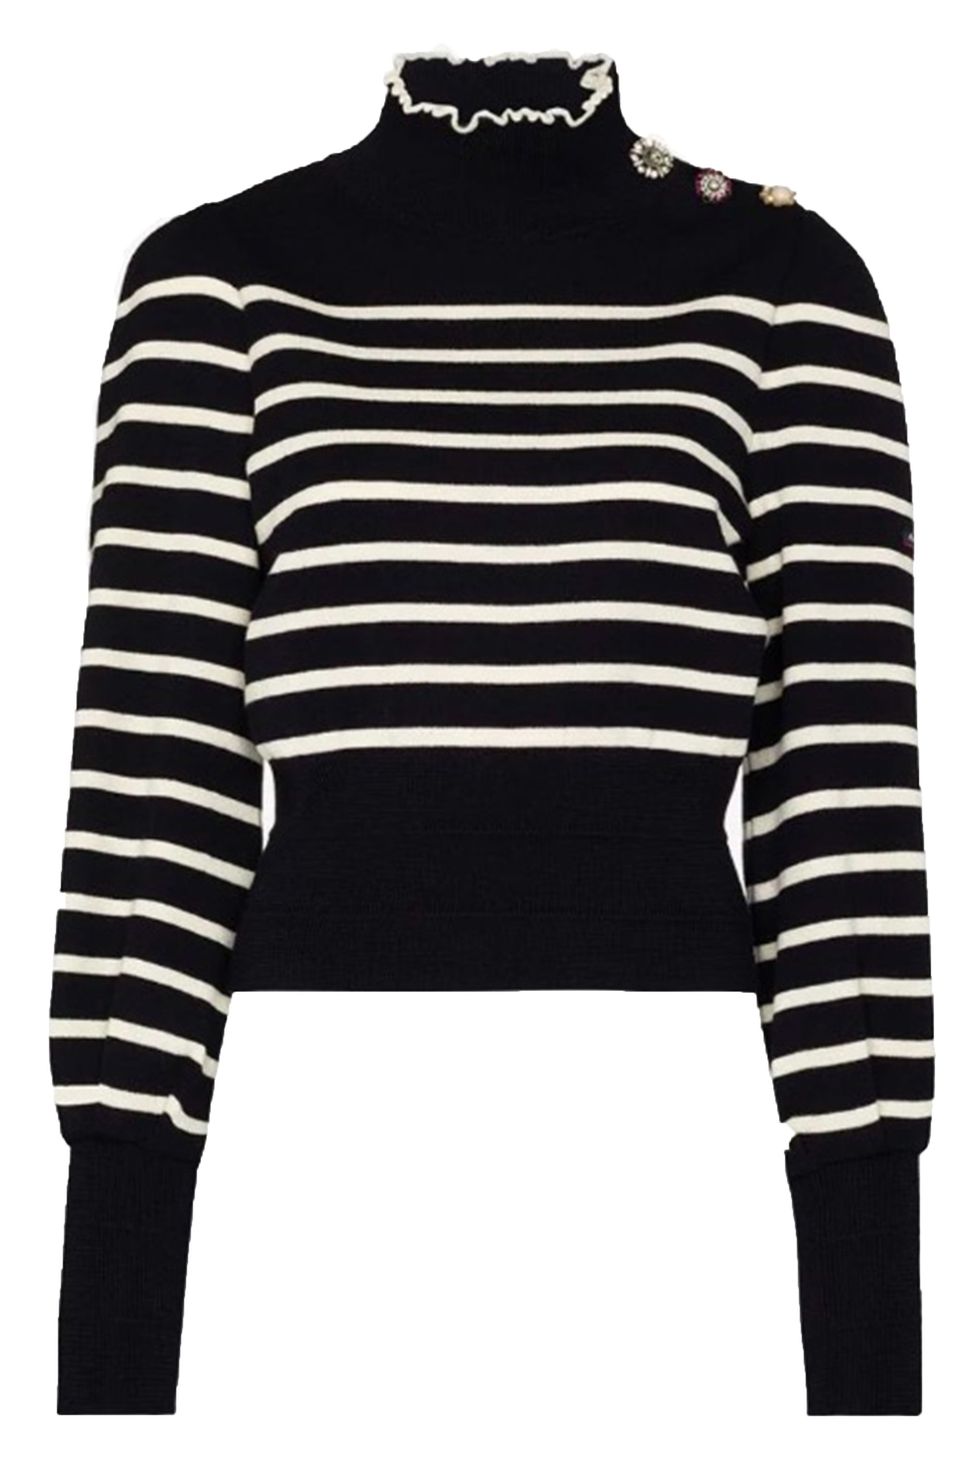 Why the Breton top will never lose its appeal